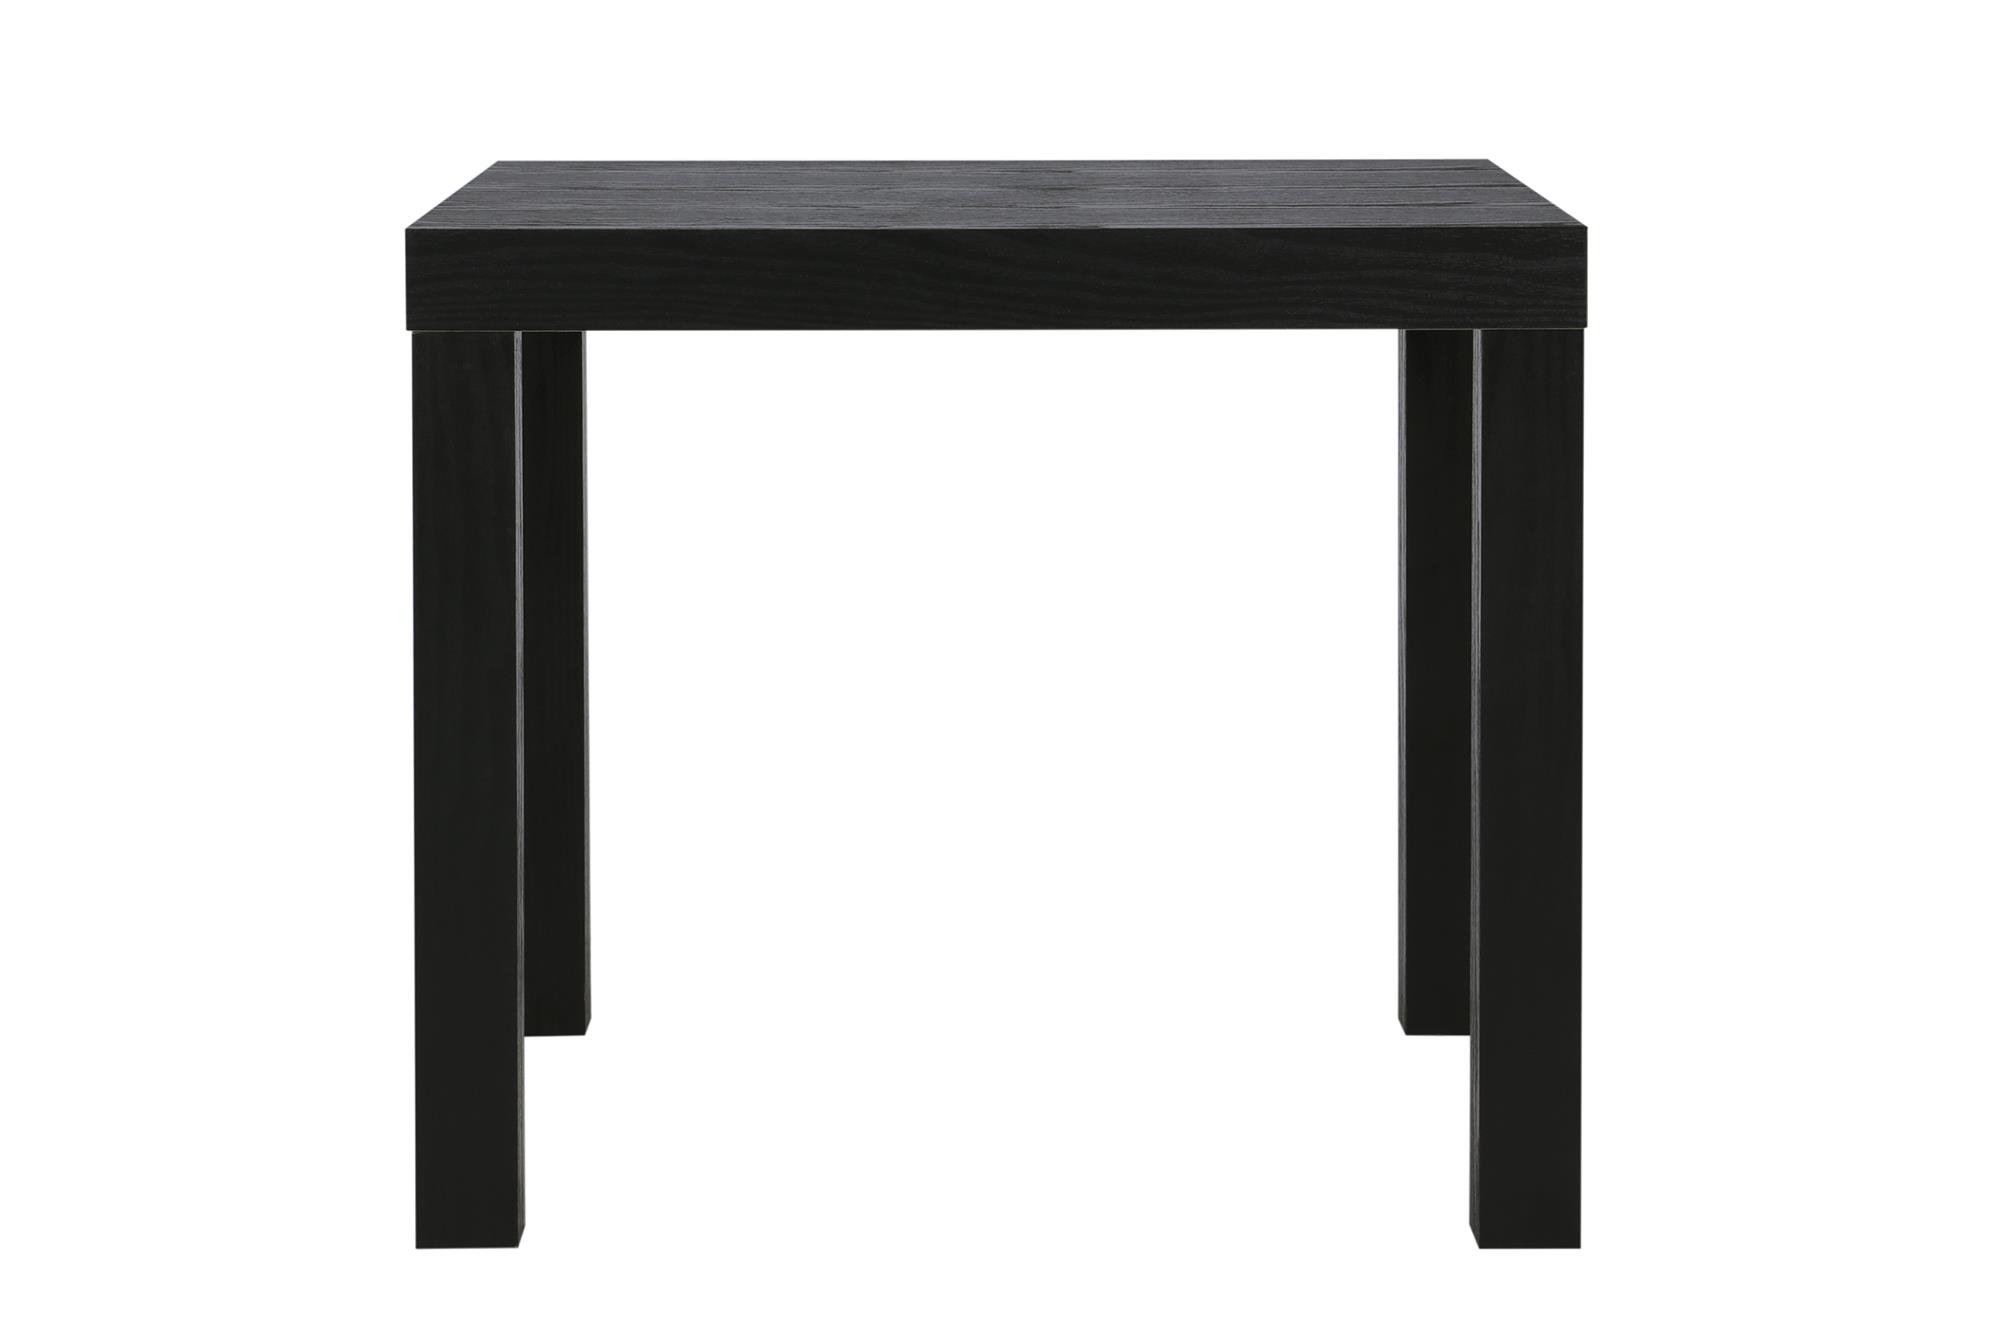 Mainstays Parson's End Table, Black - image 2 of 8